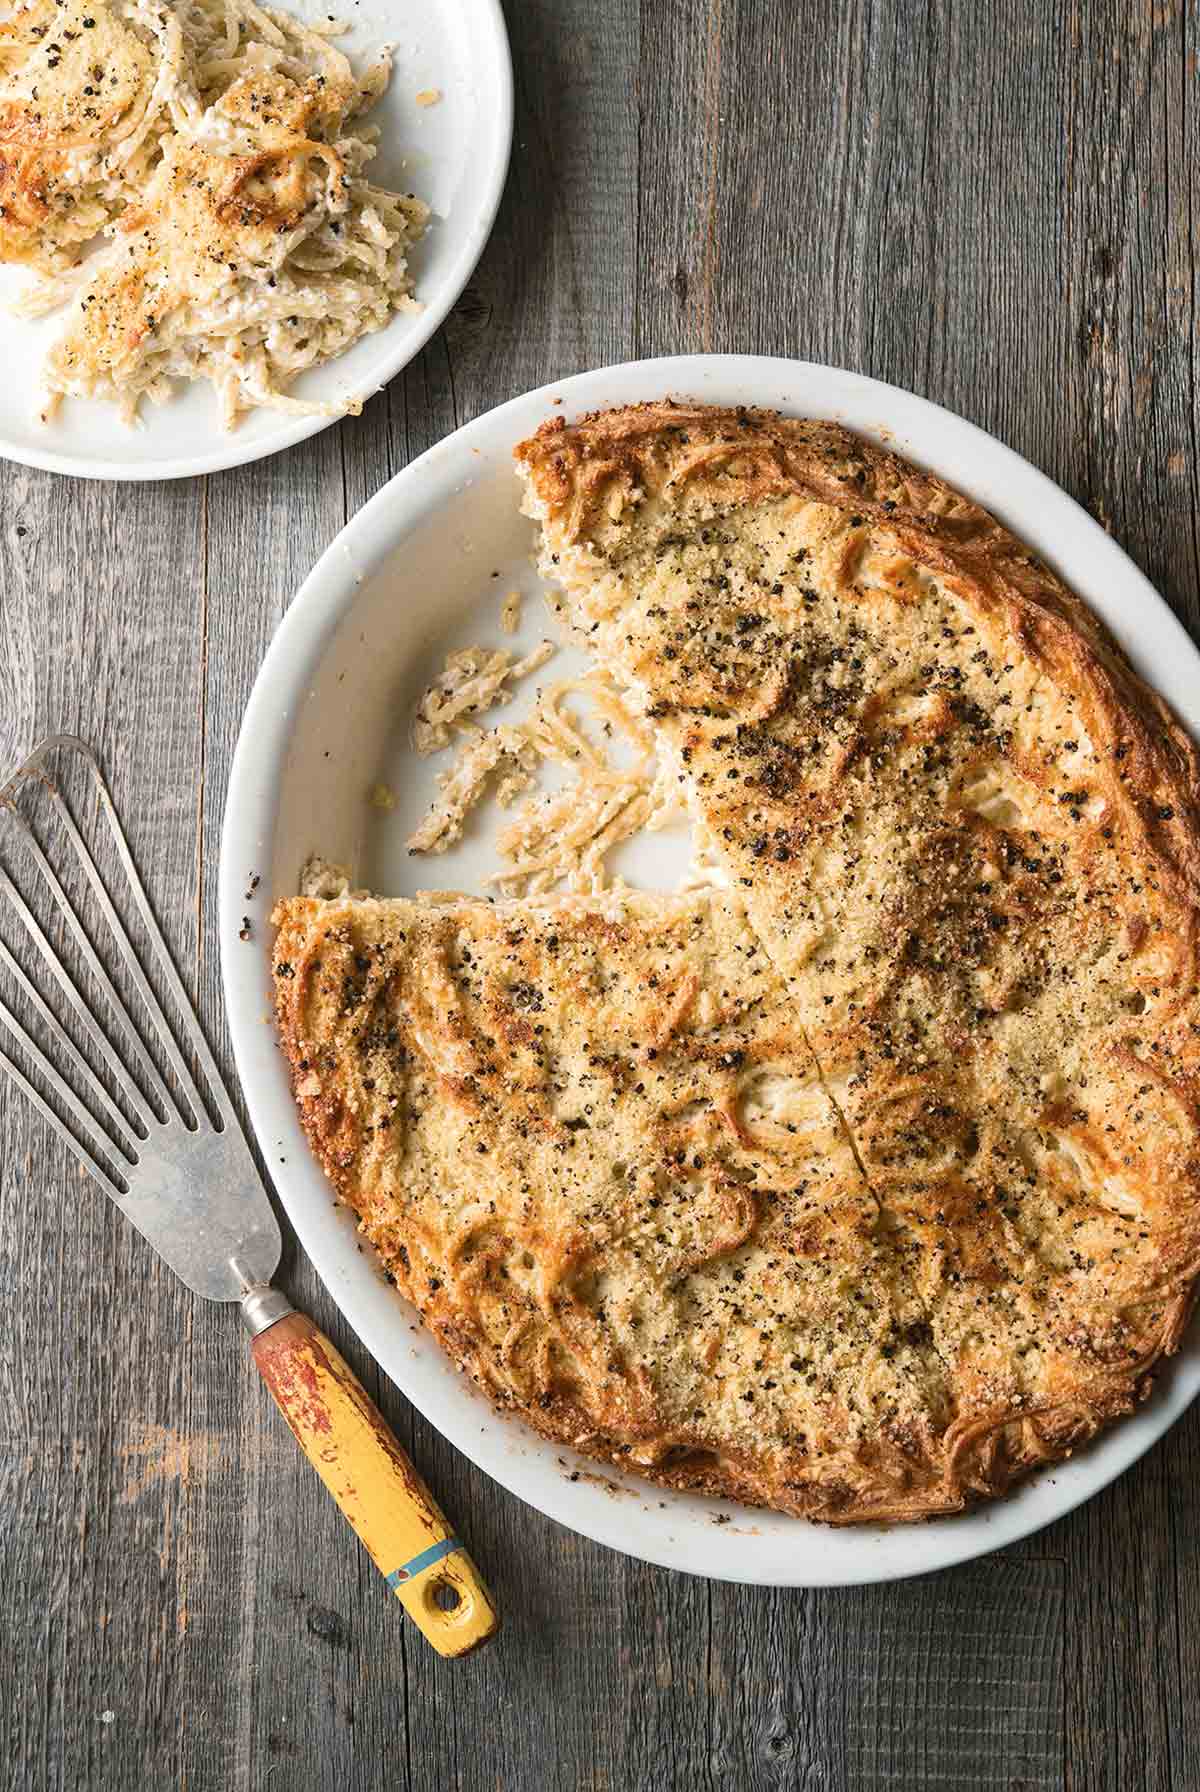 Oval dish with cacio e pepe kugel, a cheese and pepper casserole with fettuccine and ricotta and Pecorino cheeses baked golden